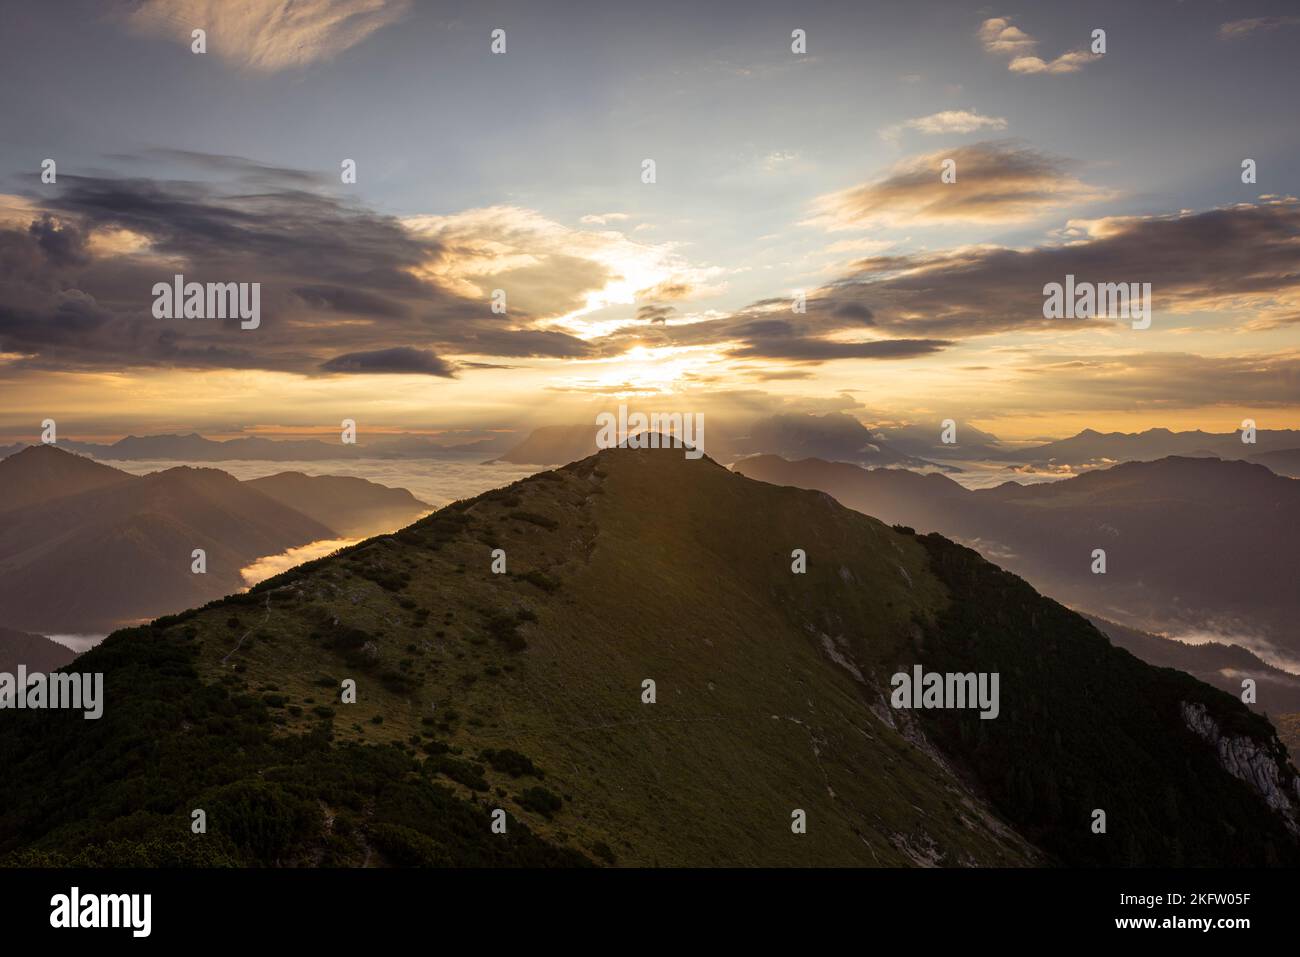 View from Mount Frechjoch to the sunrise over the Veitsberg and the Kaiser Mountains, Tyrol, Austria Stock Photo